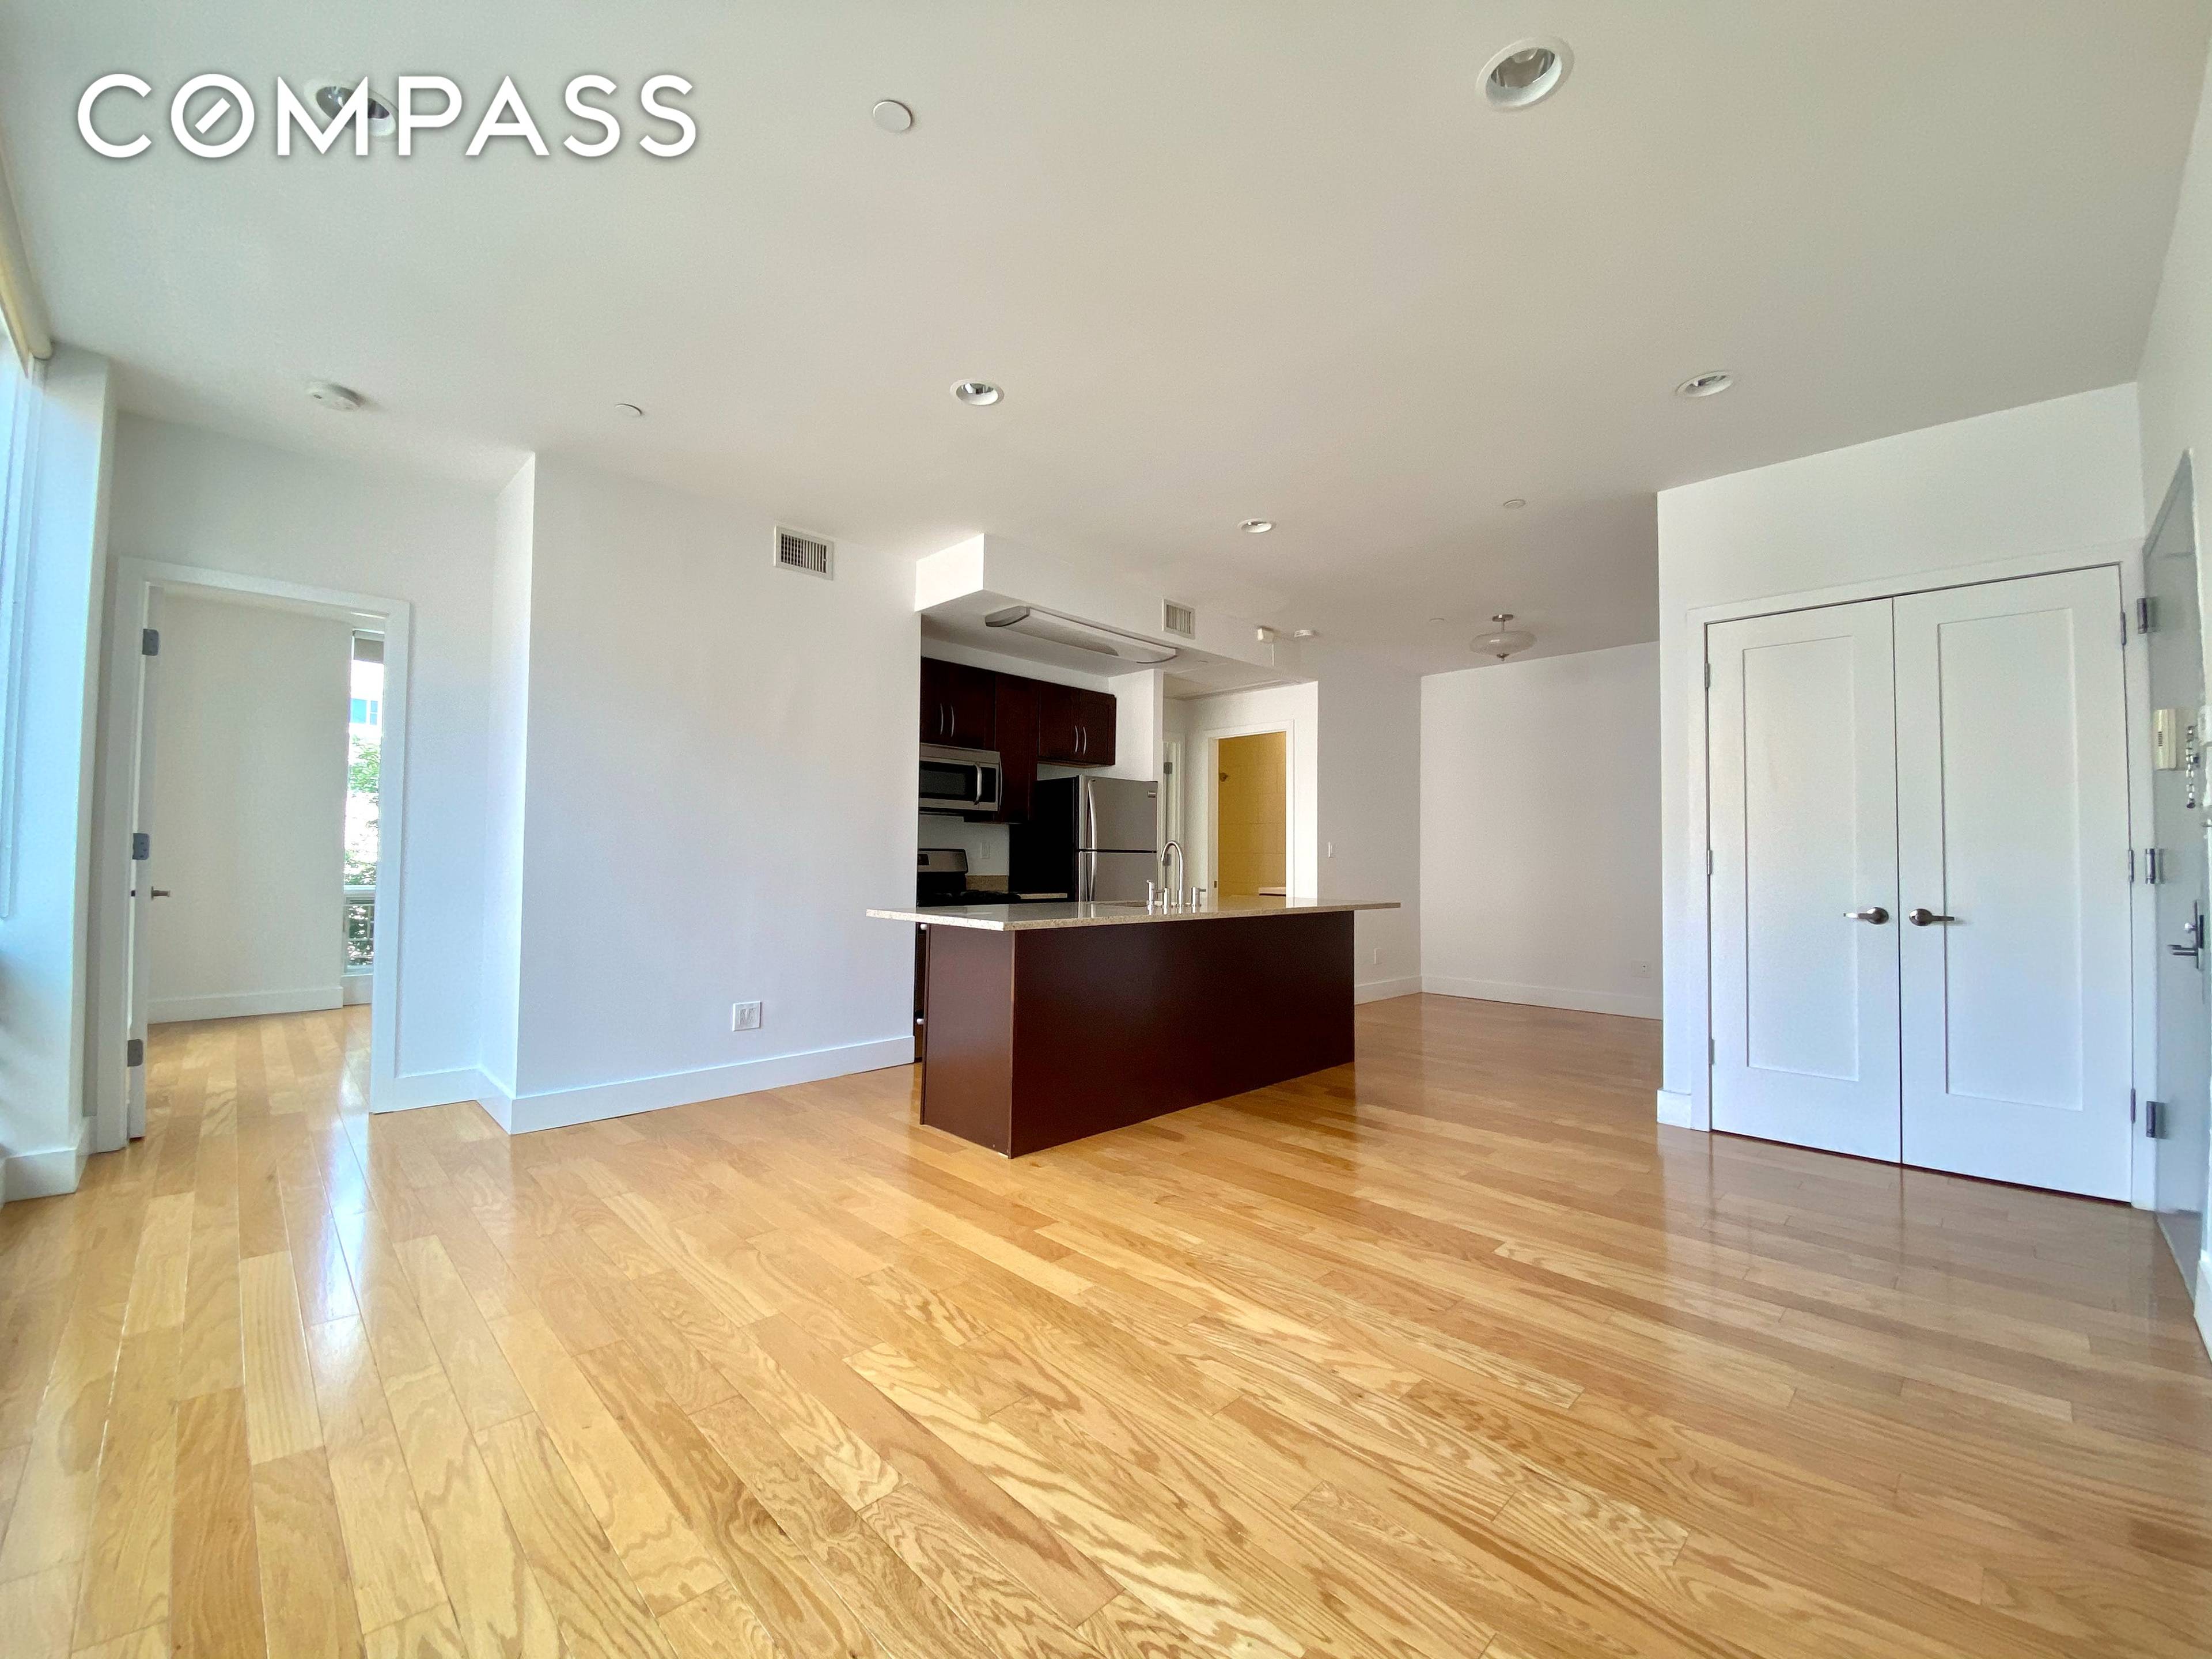 New construction next to Astoria Park South 2 bed apt queen rooms Over sized windows Heated floors Mitsubishi air conditioning Stainless steel appliances Dishwasher Elevator On site laundry Shared roof ...